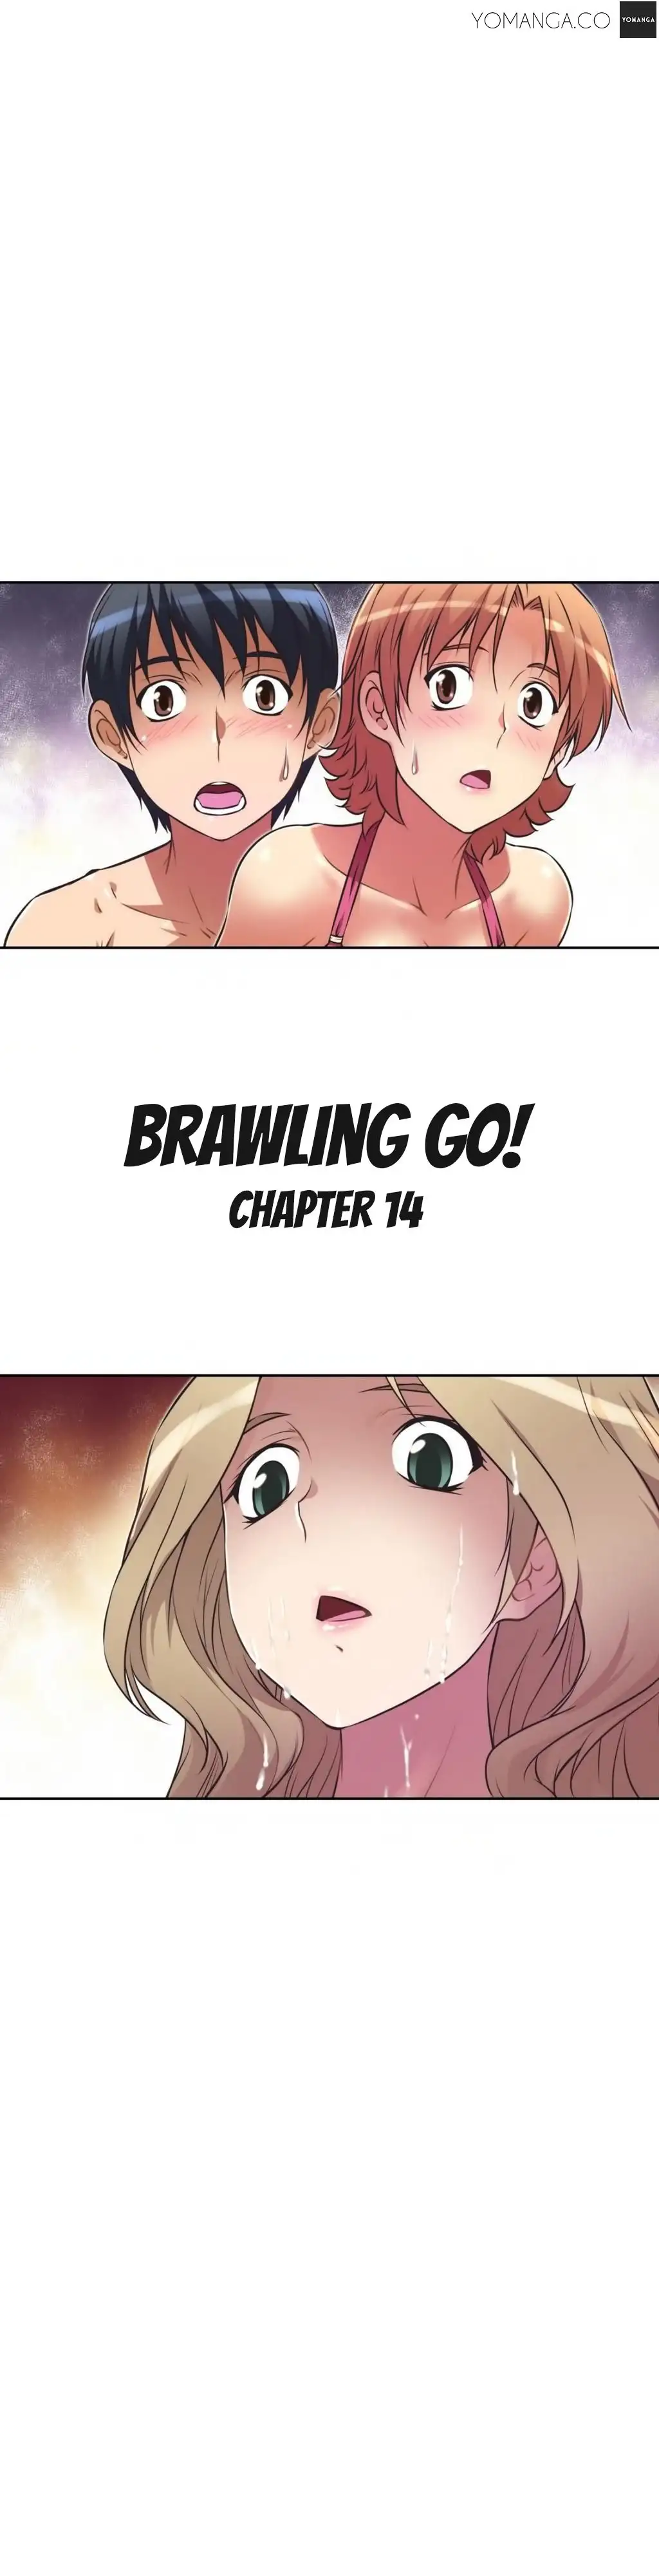 Brawling Go! - Chapter 14 Page 1